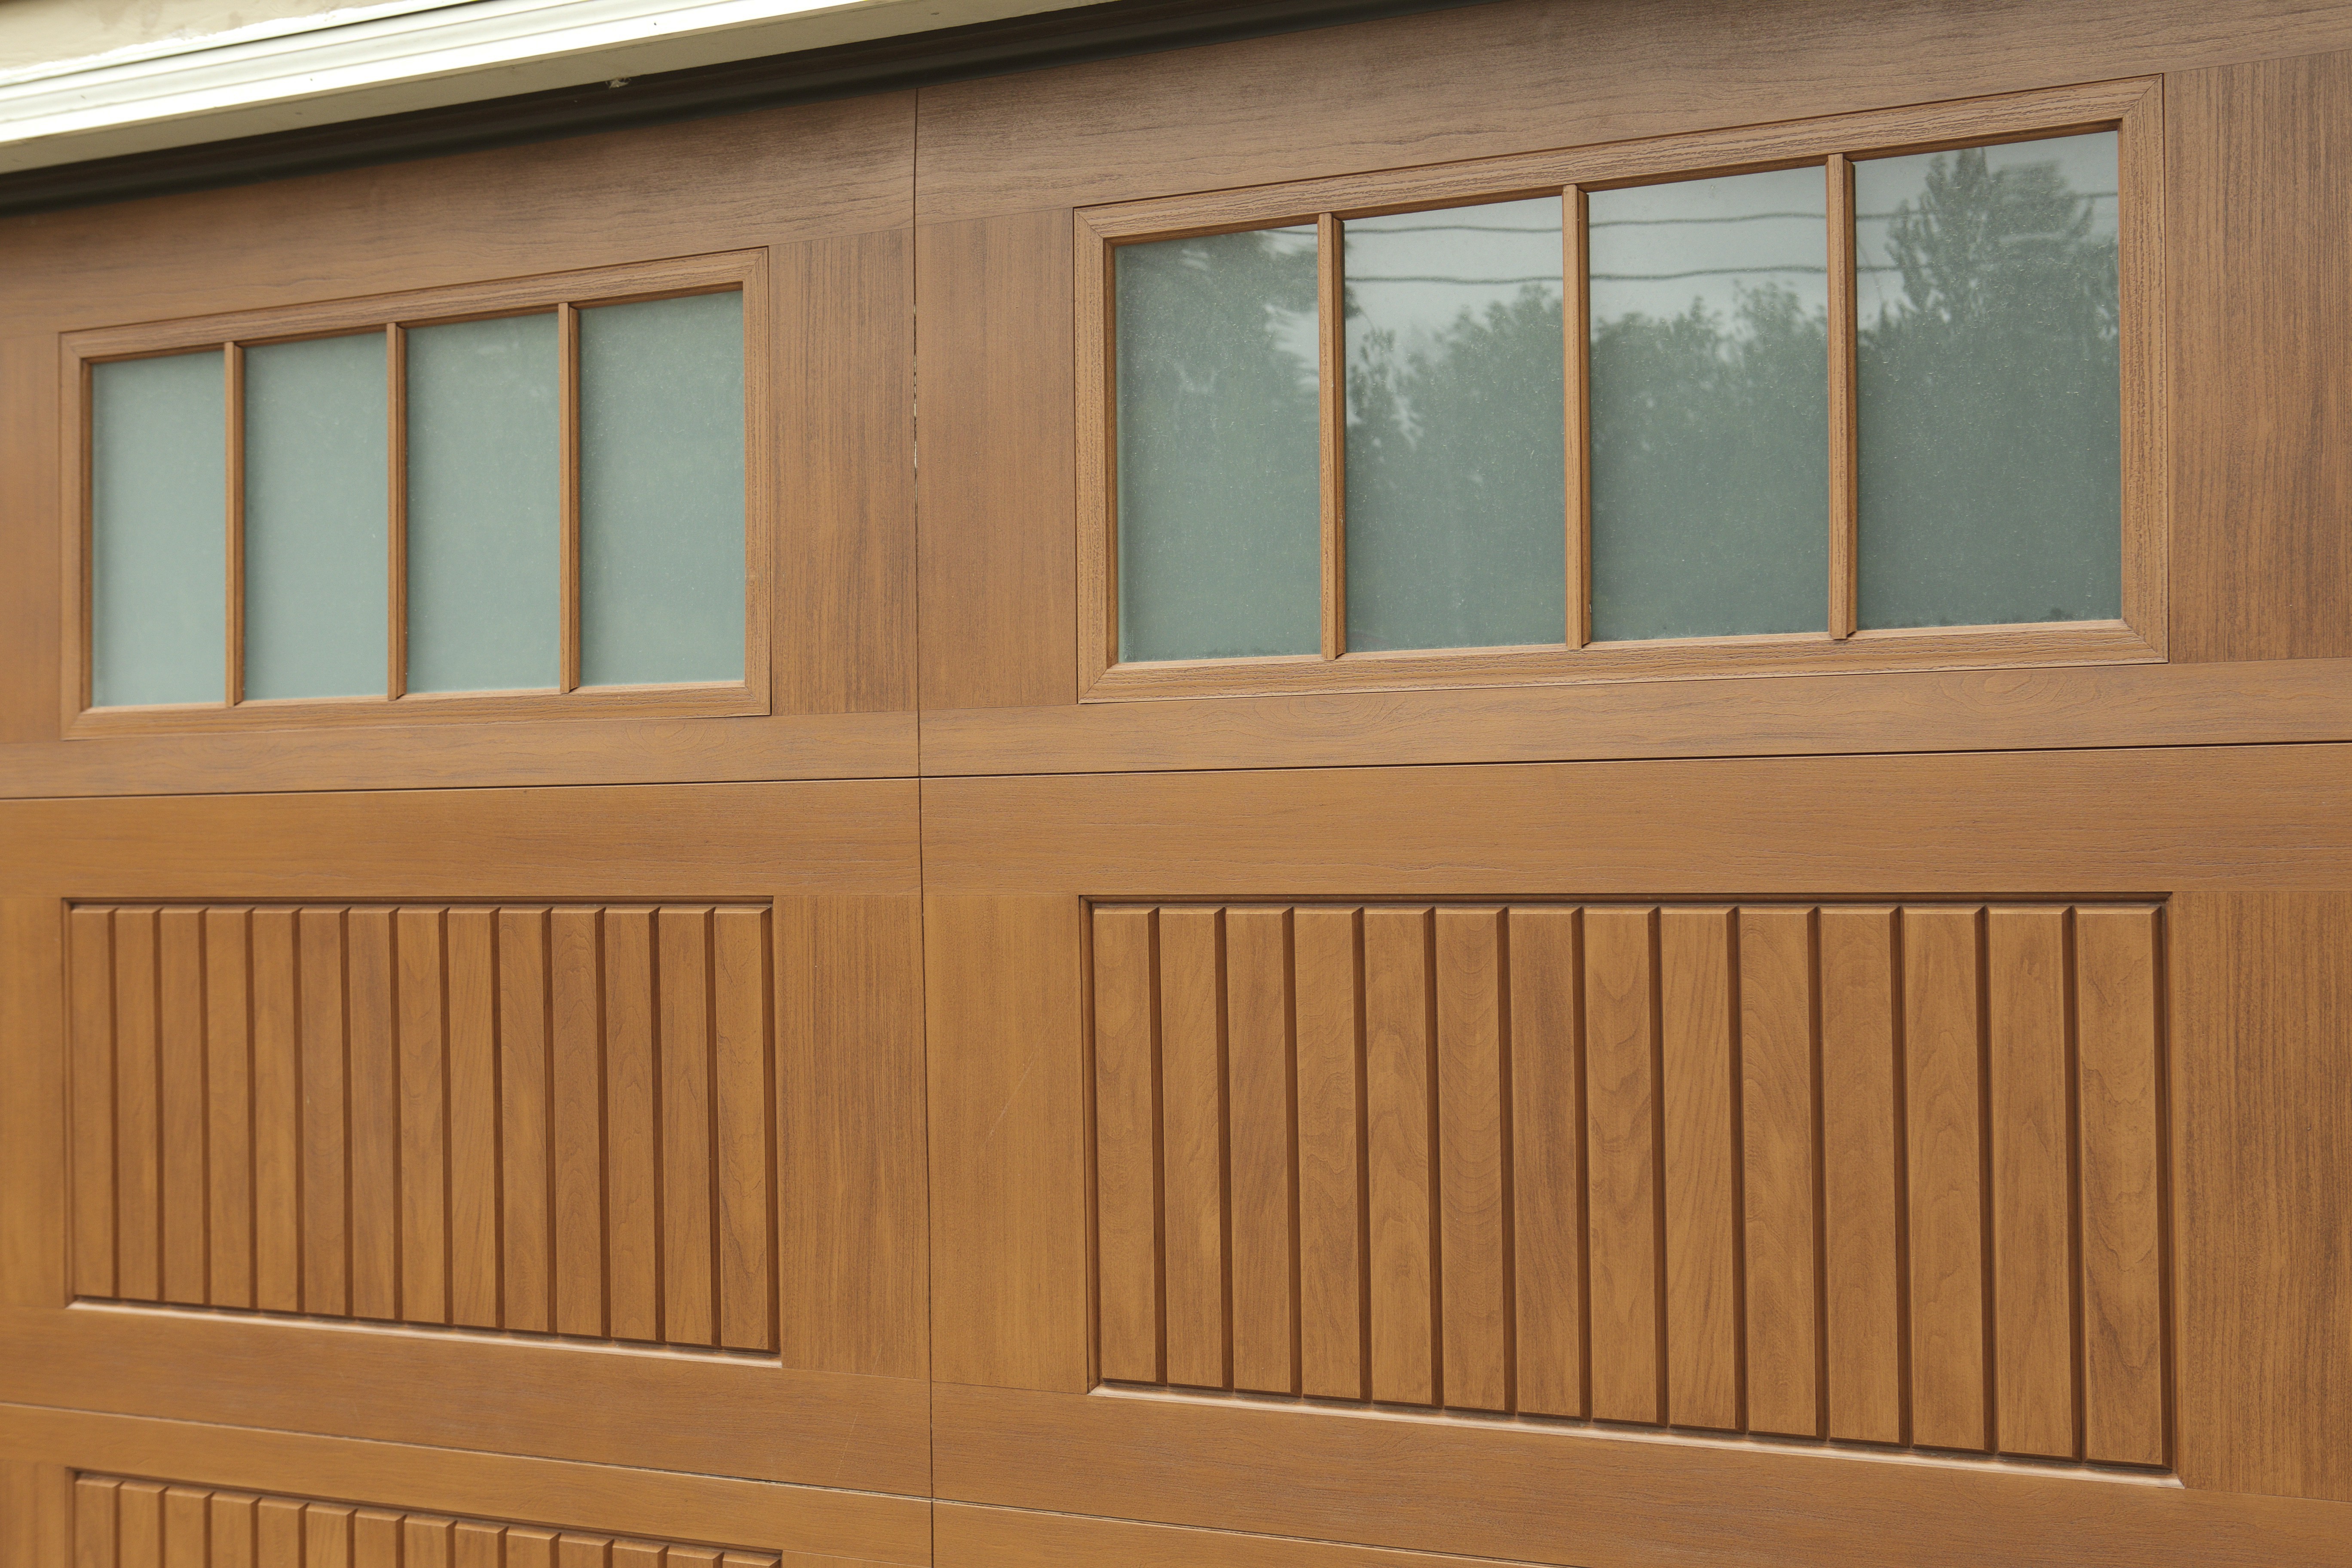 How a garage door can add value to your home